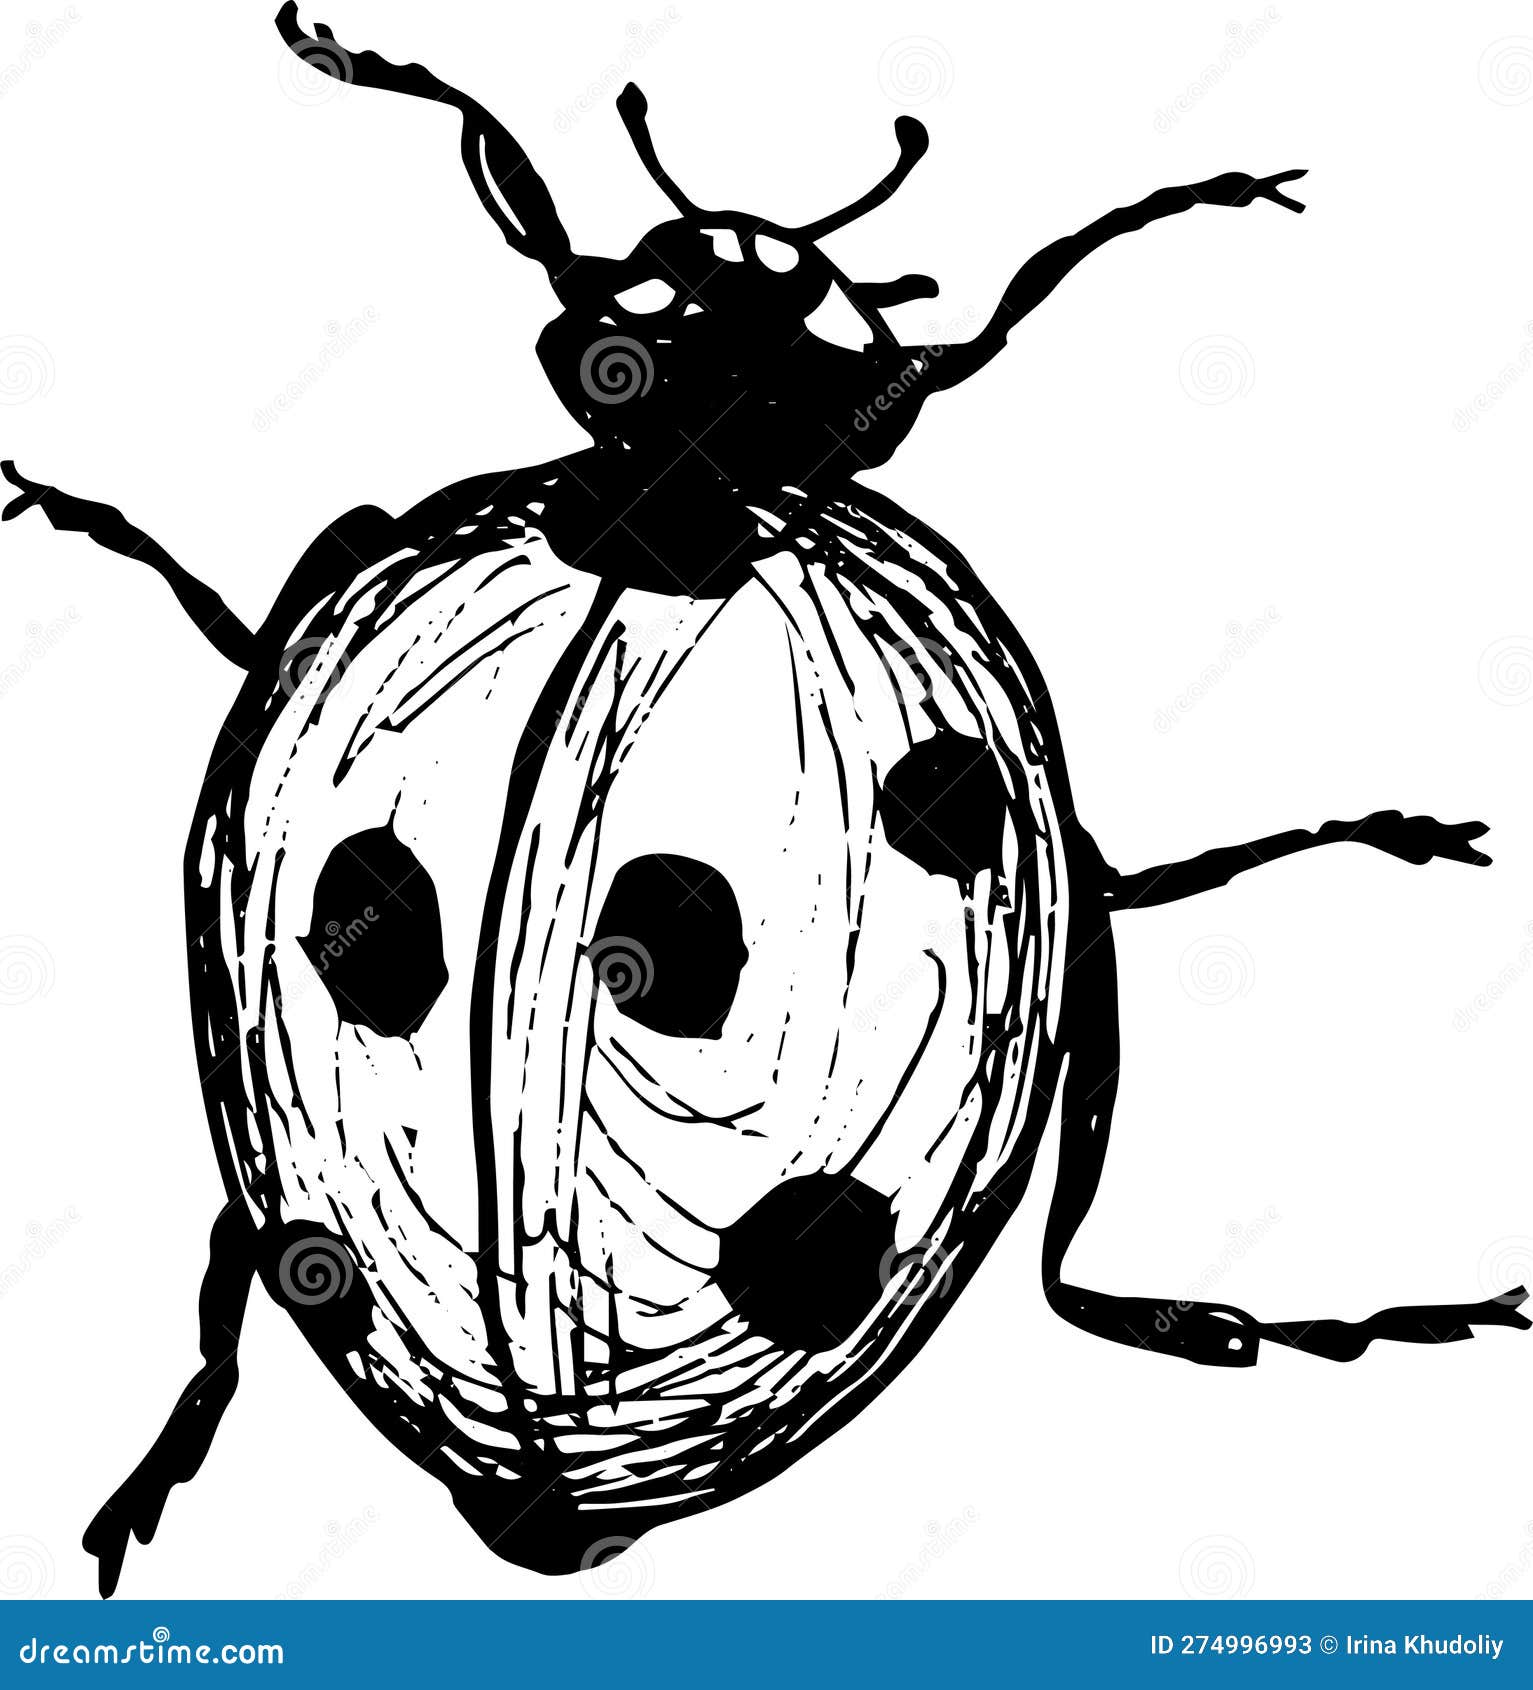 Draw Ladybugs by Diana-Huang on DeviantArt | Bugs drawing, Lady bug drawing,  Drawings